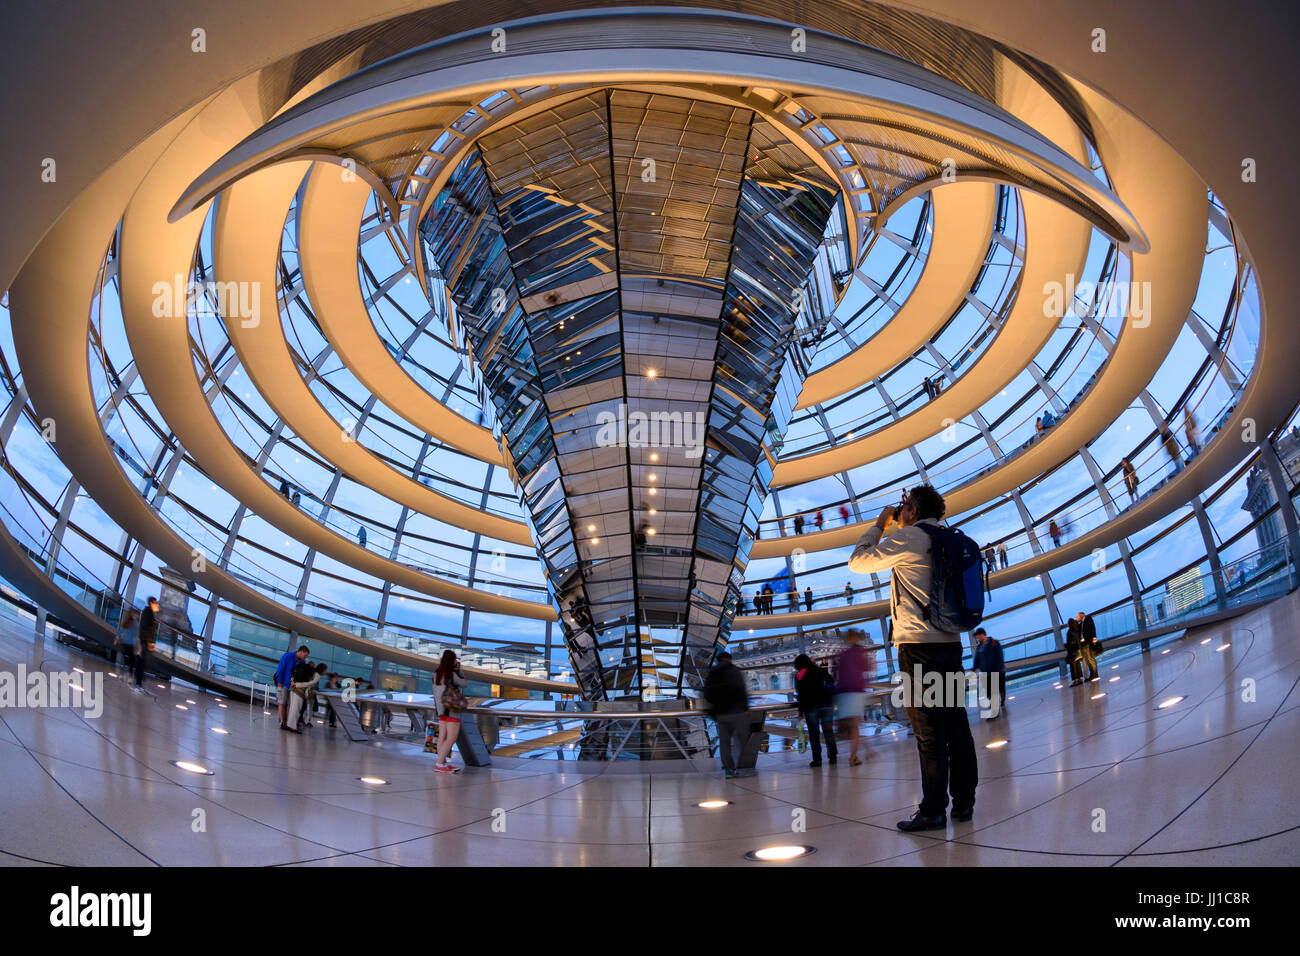 Berlin. Germany. Interior of the Reichstag dome and spiral ramp at sunset. Stock Photo